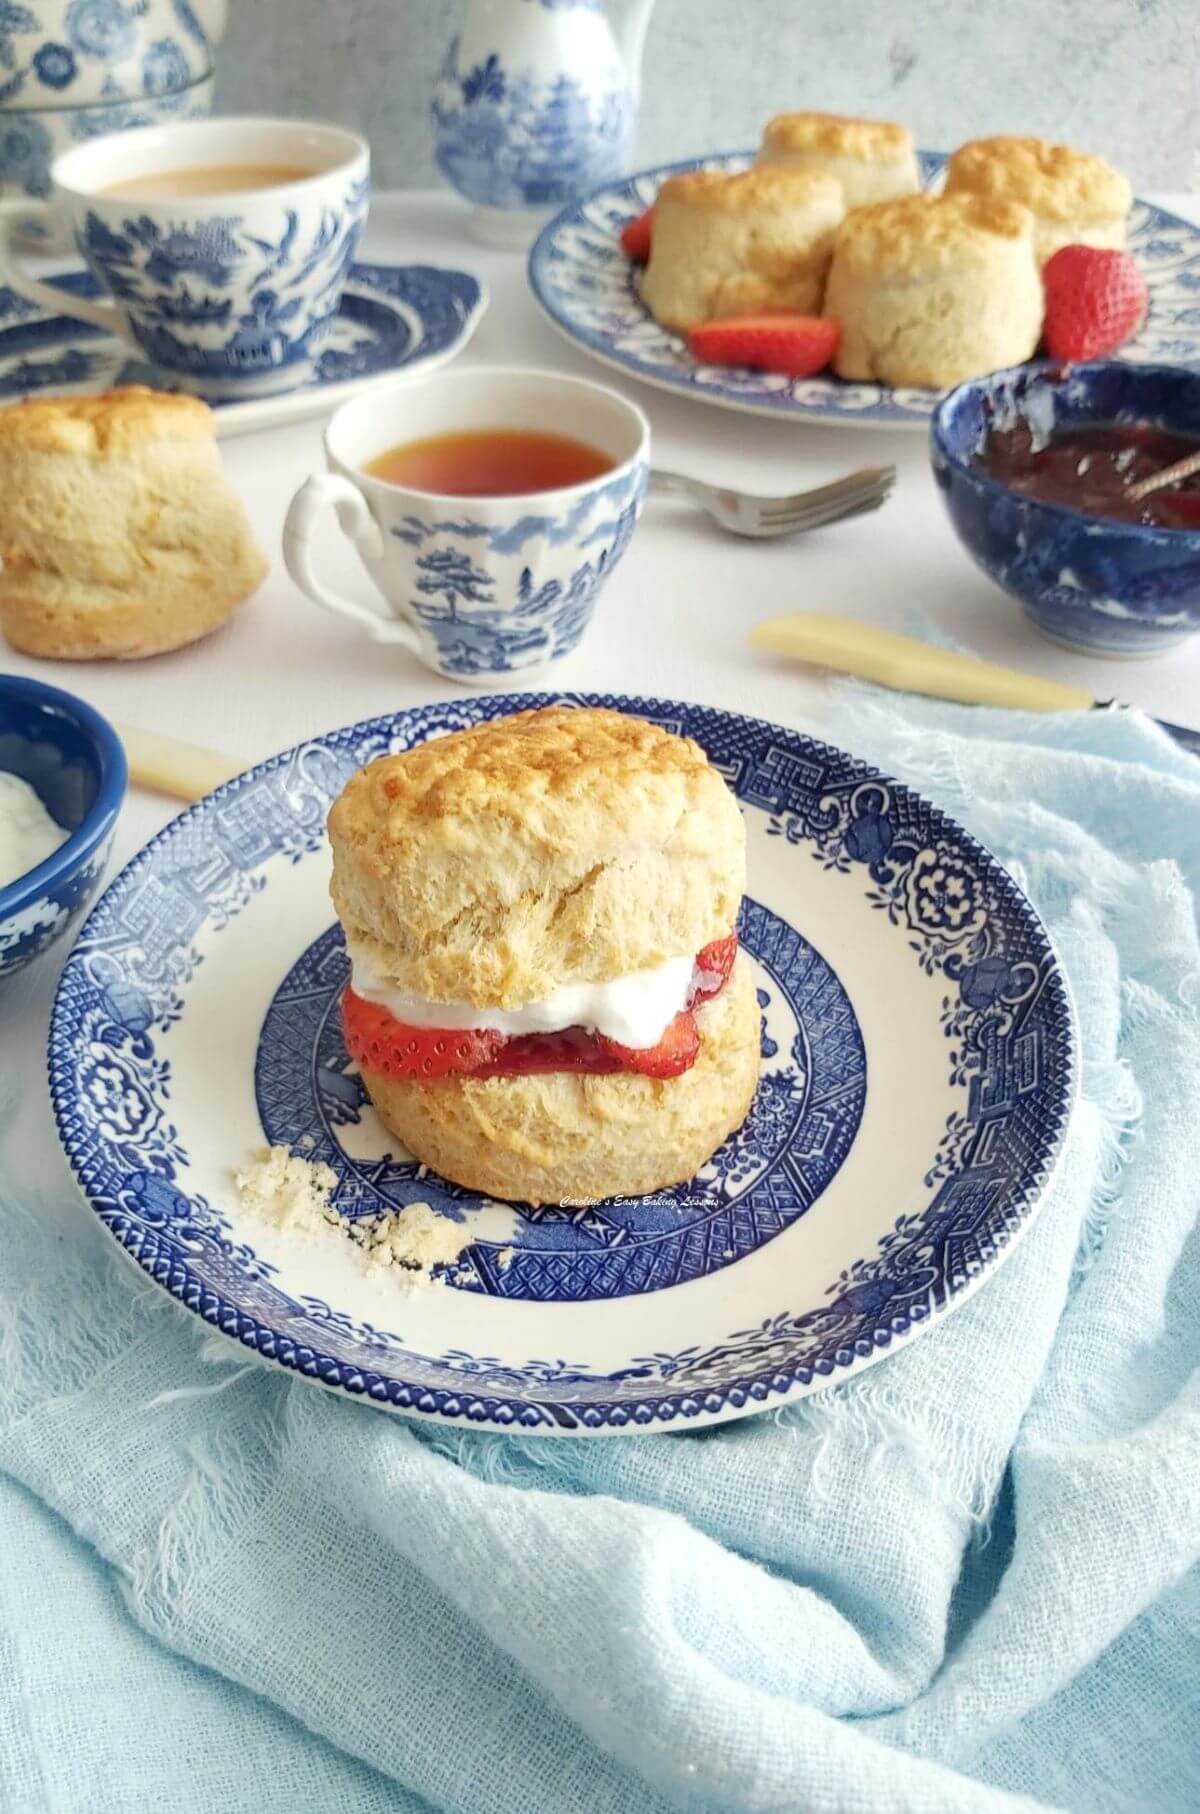 long photo of a British scone with cream, jam and strawberry sliced in-between, served on blue & white Willow tea set.